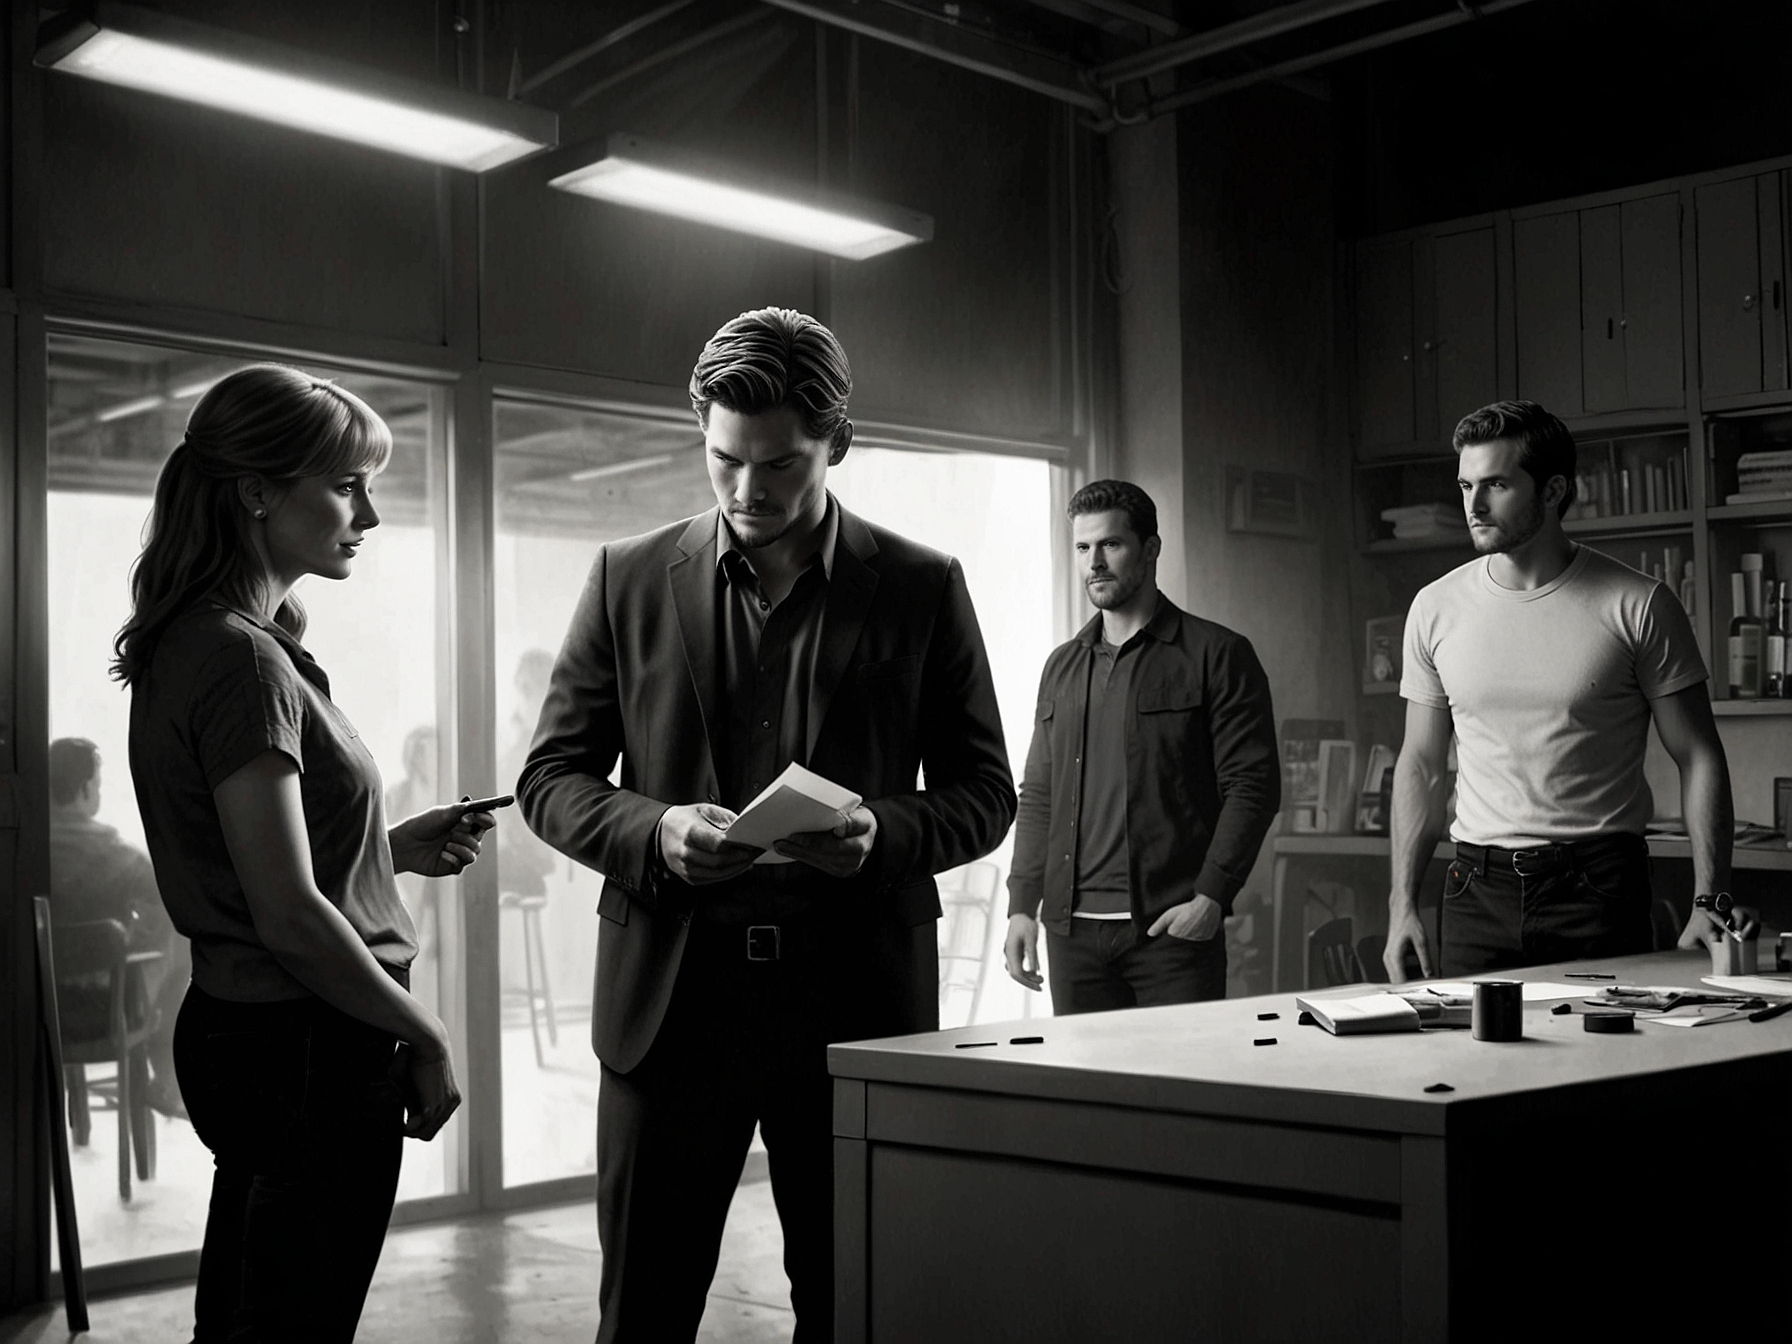 A behind-the-scenes image illustrating the remaining cast members, including Luke Grimes, Kelly Reilly, Wes Bentley, and Cole Hauser, preparing for a crucial scene in the final episodes.